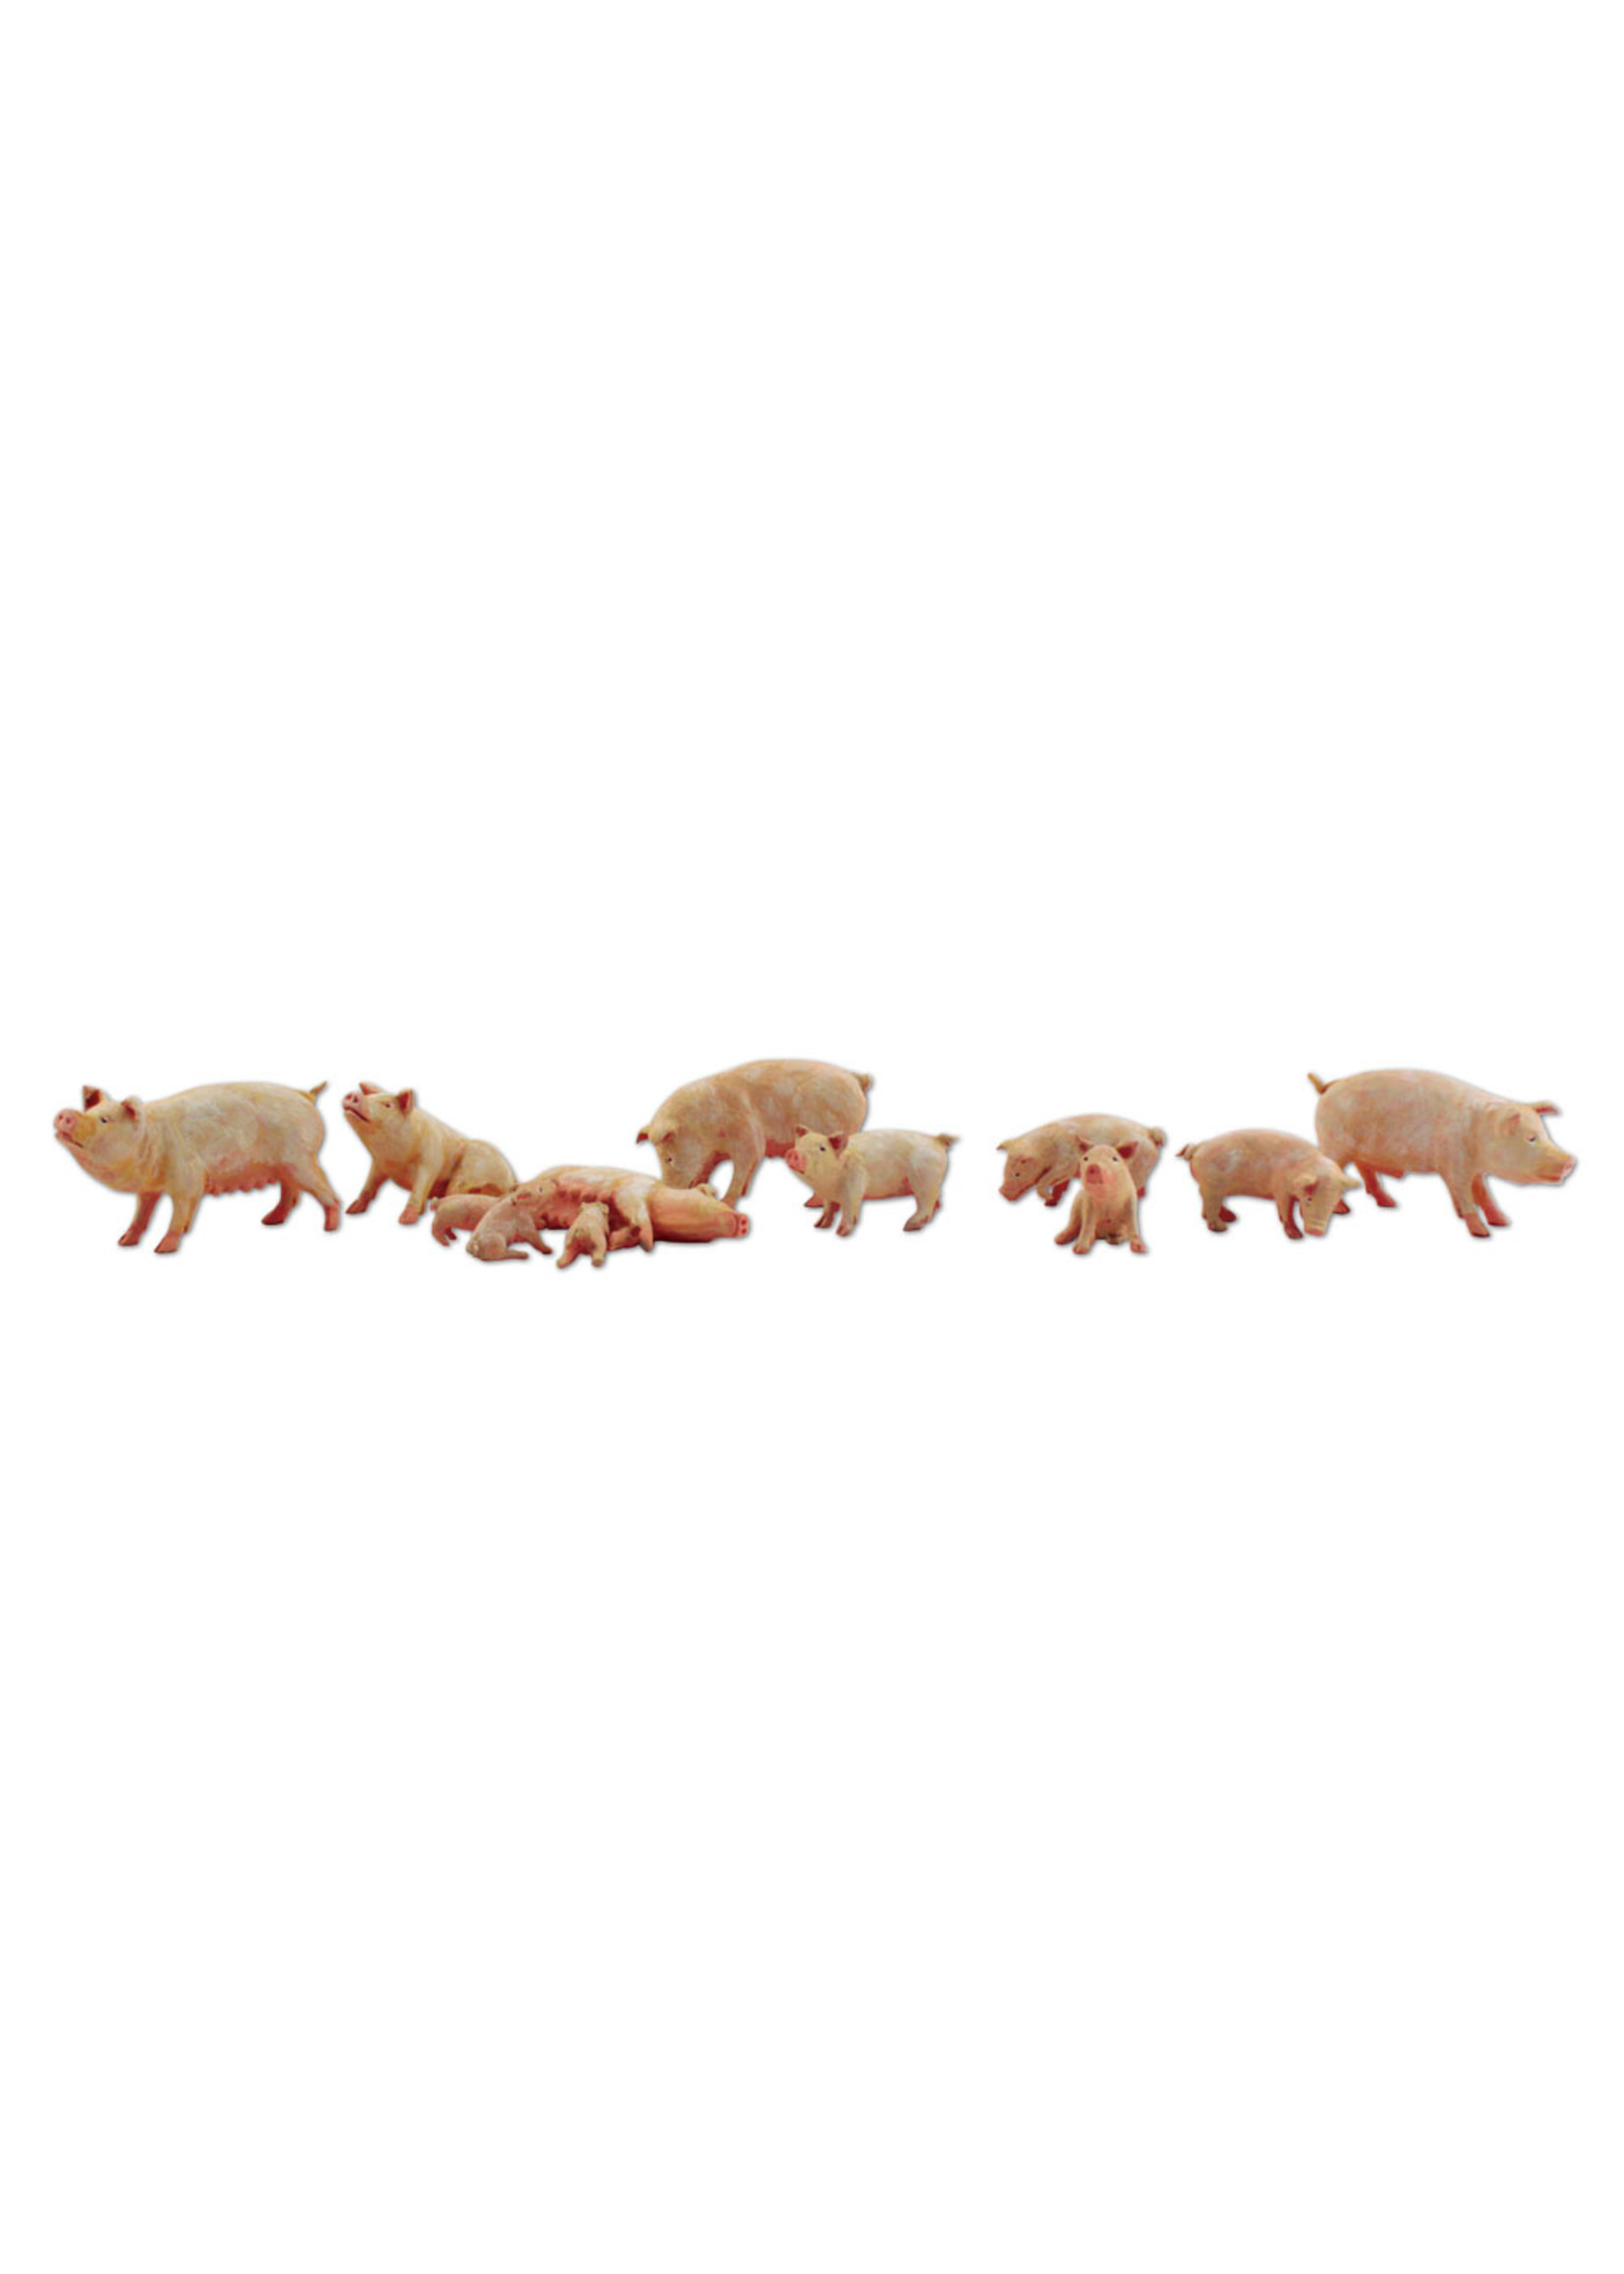 Woodland Scenics A2218 - N Scale Yorkshire Pigs